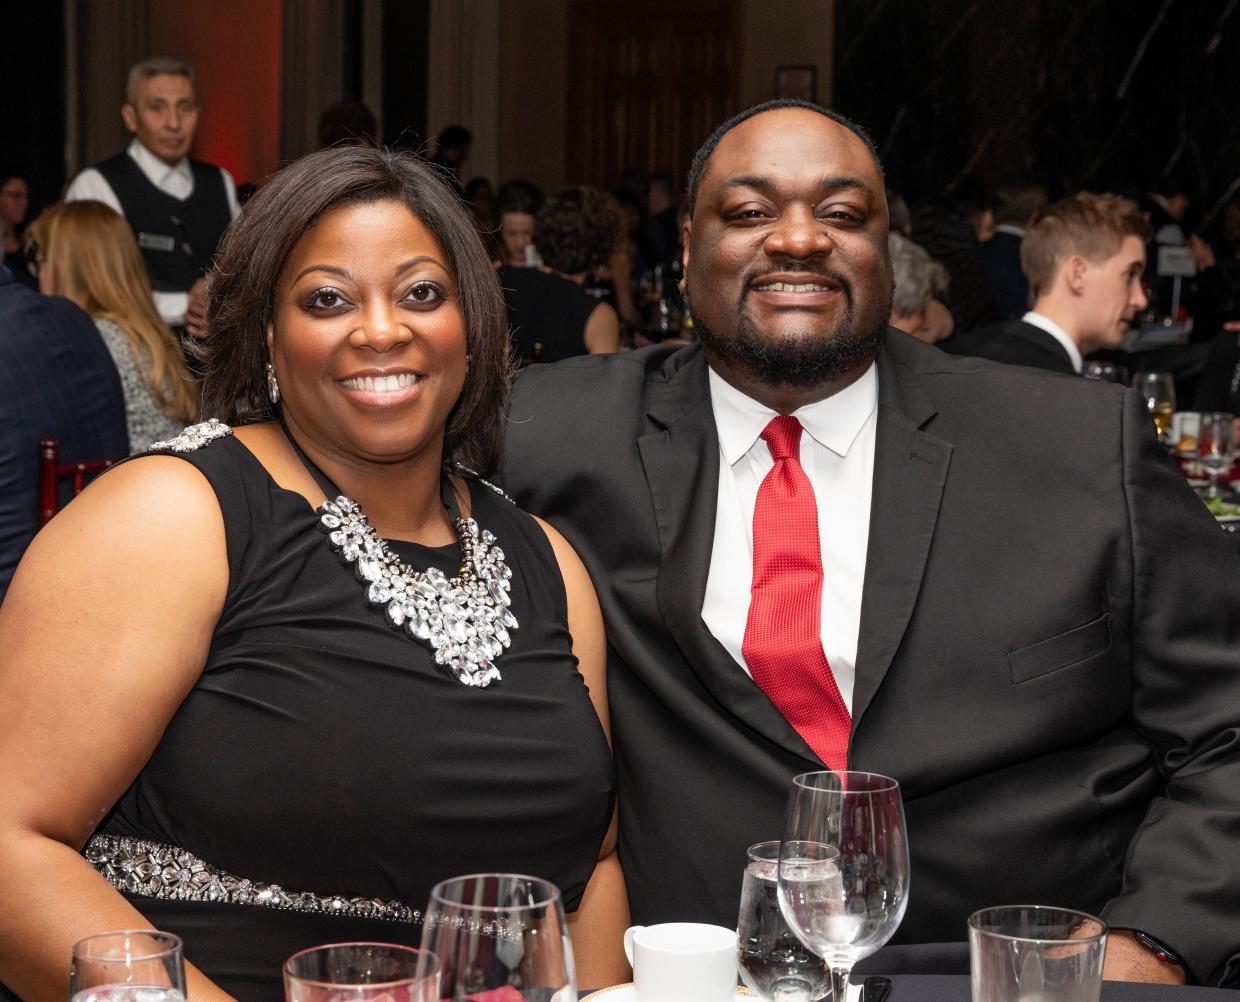 Tecara and Christopher Parker at the 2019 Housing Forward Have-a-Heart Gala